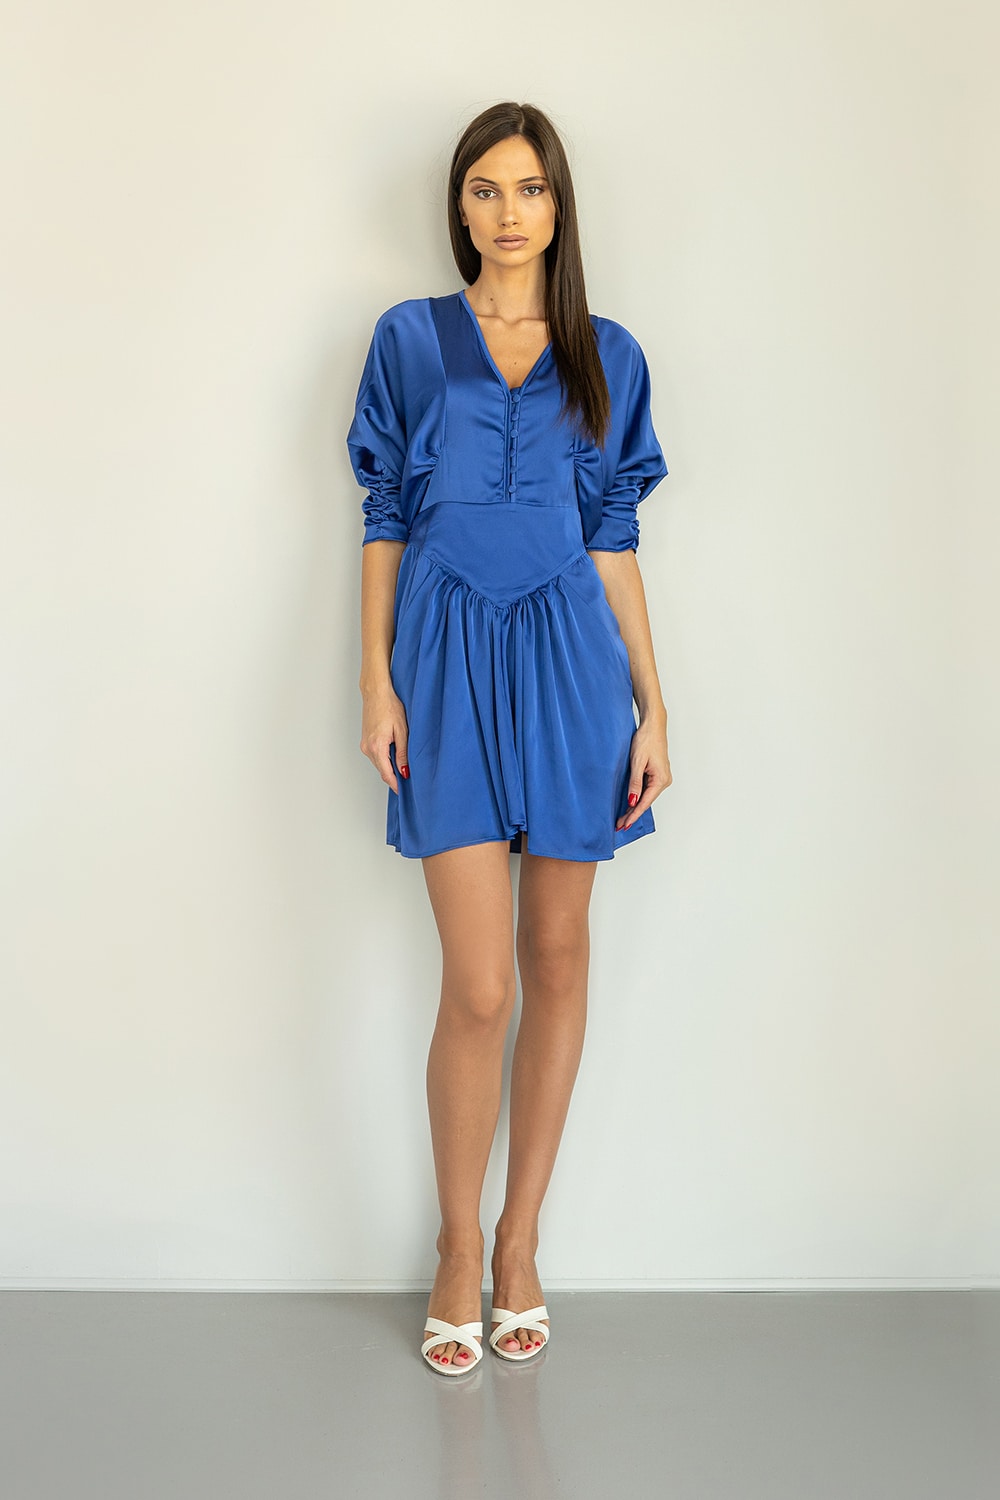 Royal blue satin mini dress with balloon sleeves and buttons